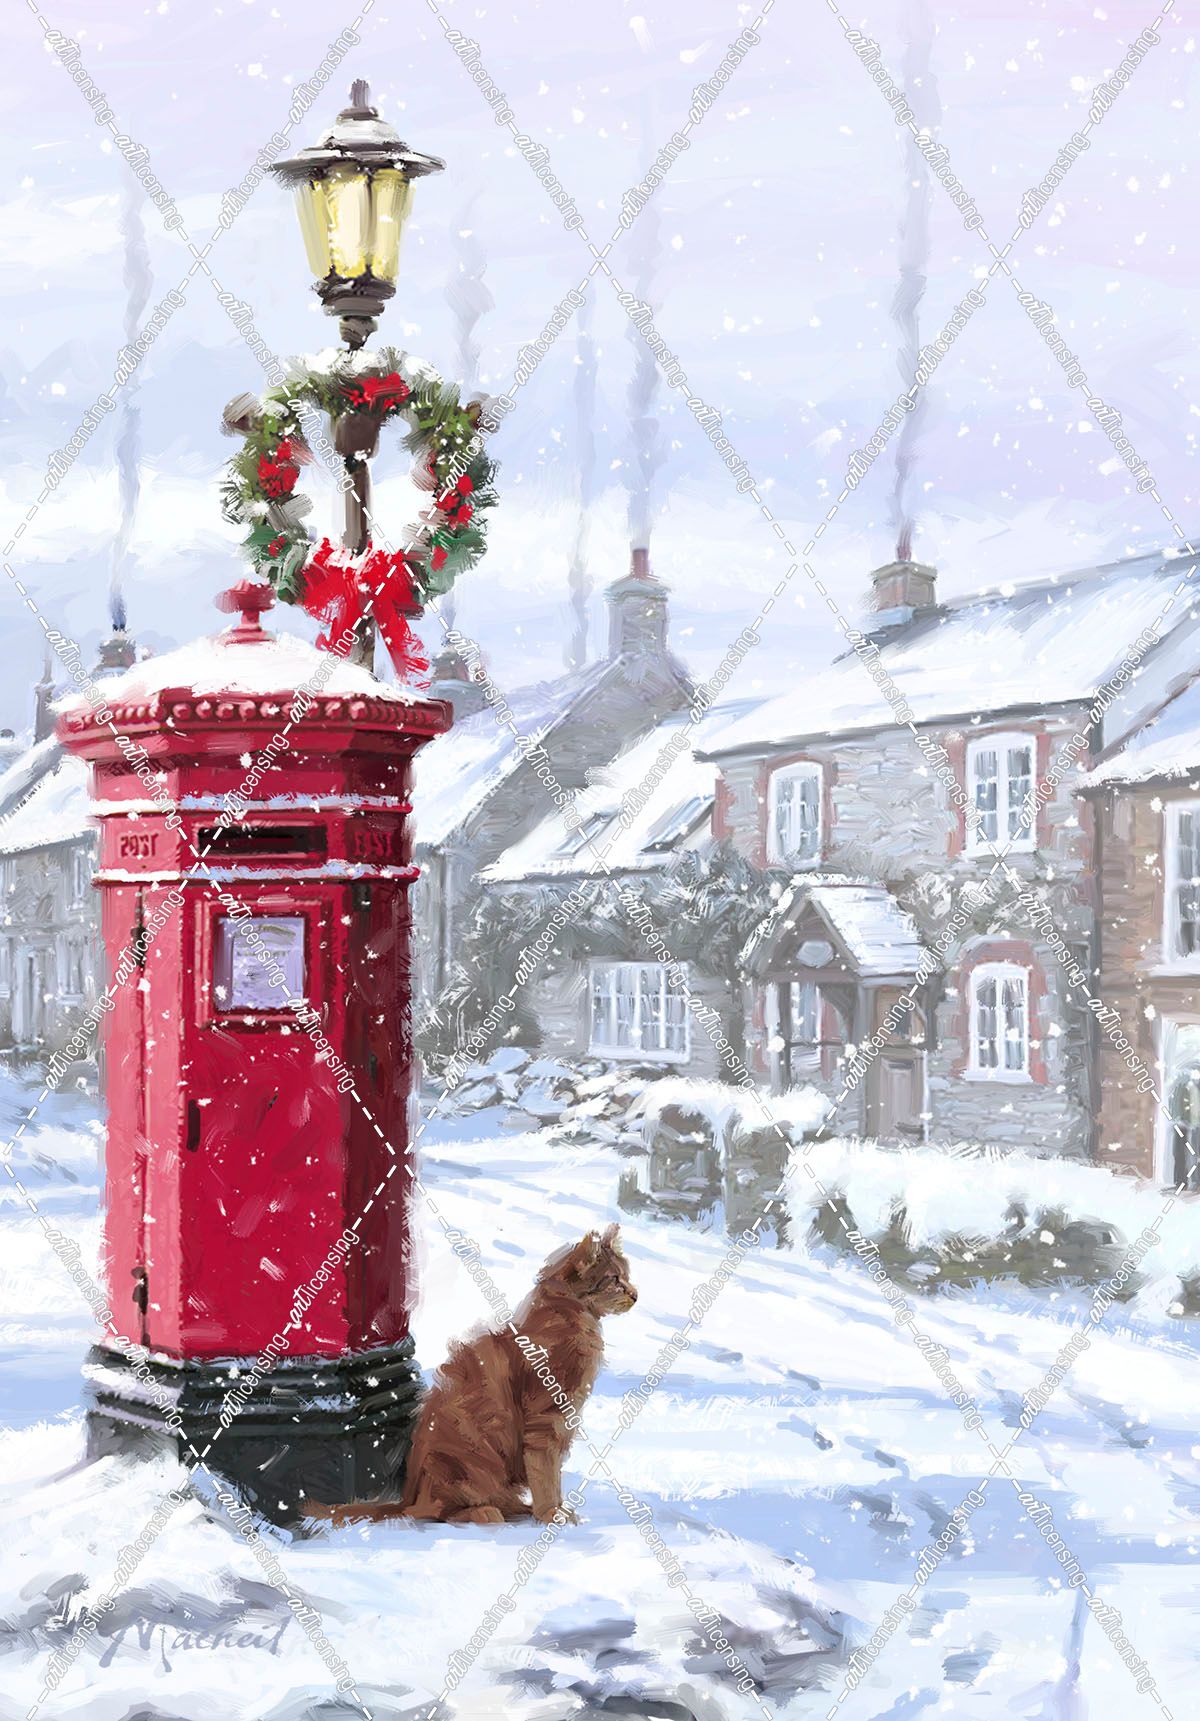 0202 Cat And Postbox